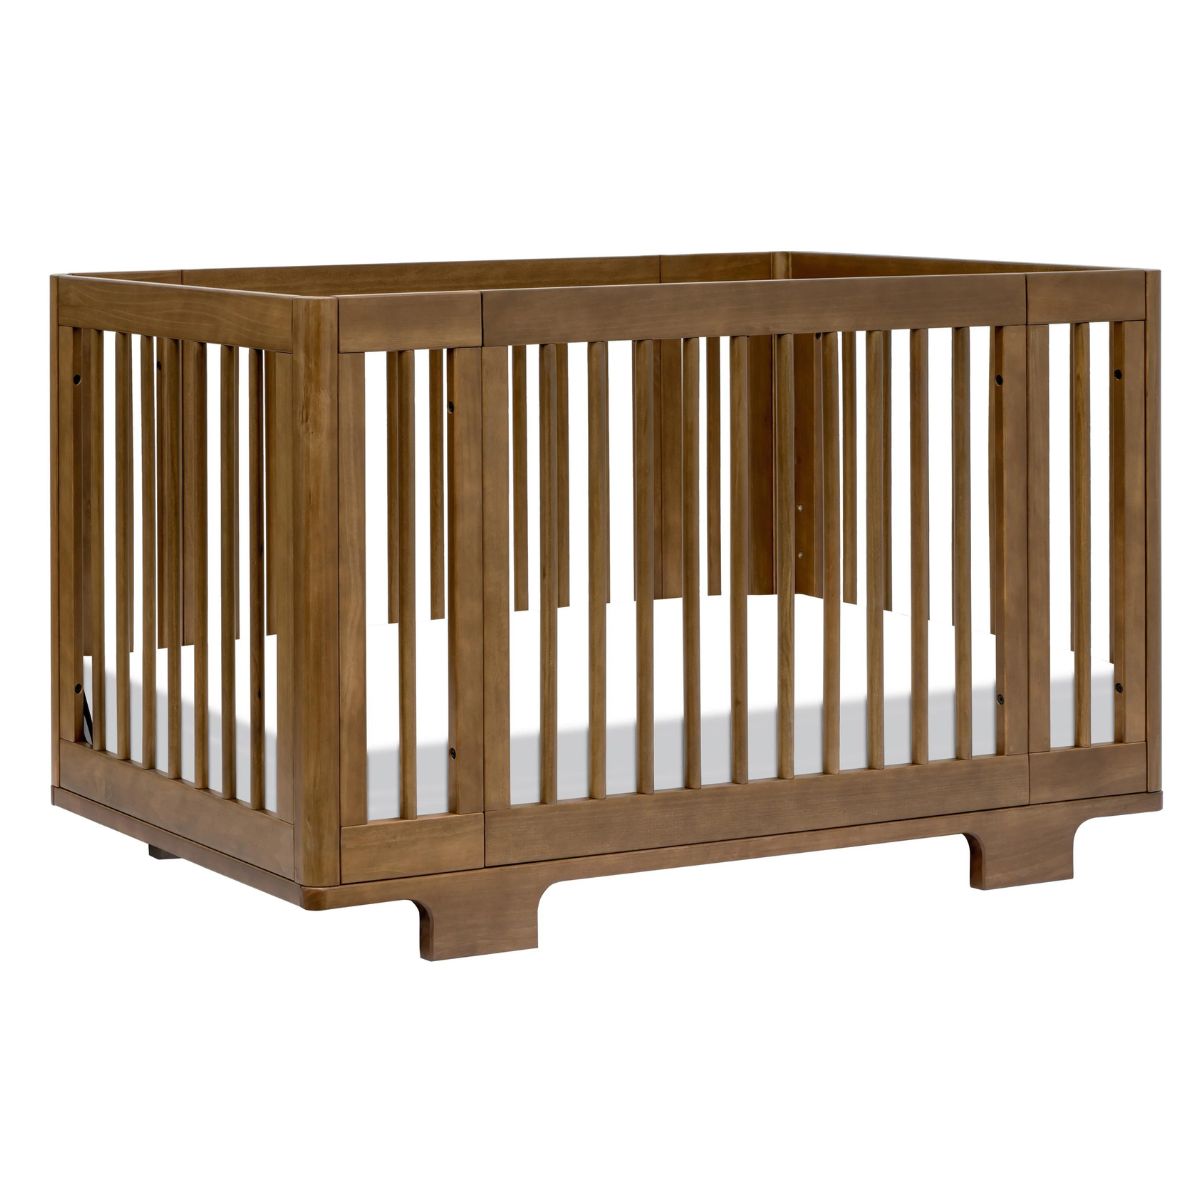 Babyletto Yuzu 8-in-1 Convertible Crib with All-Stages Conversion Kits - Natural Walnut